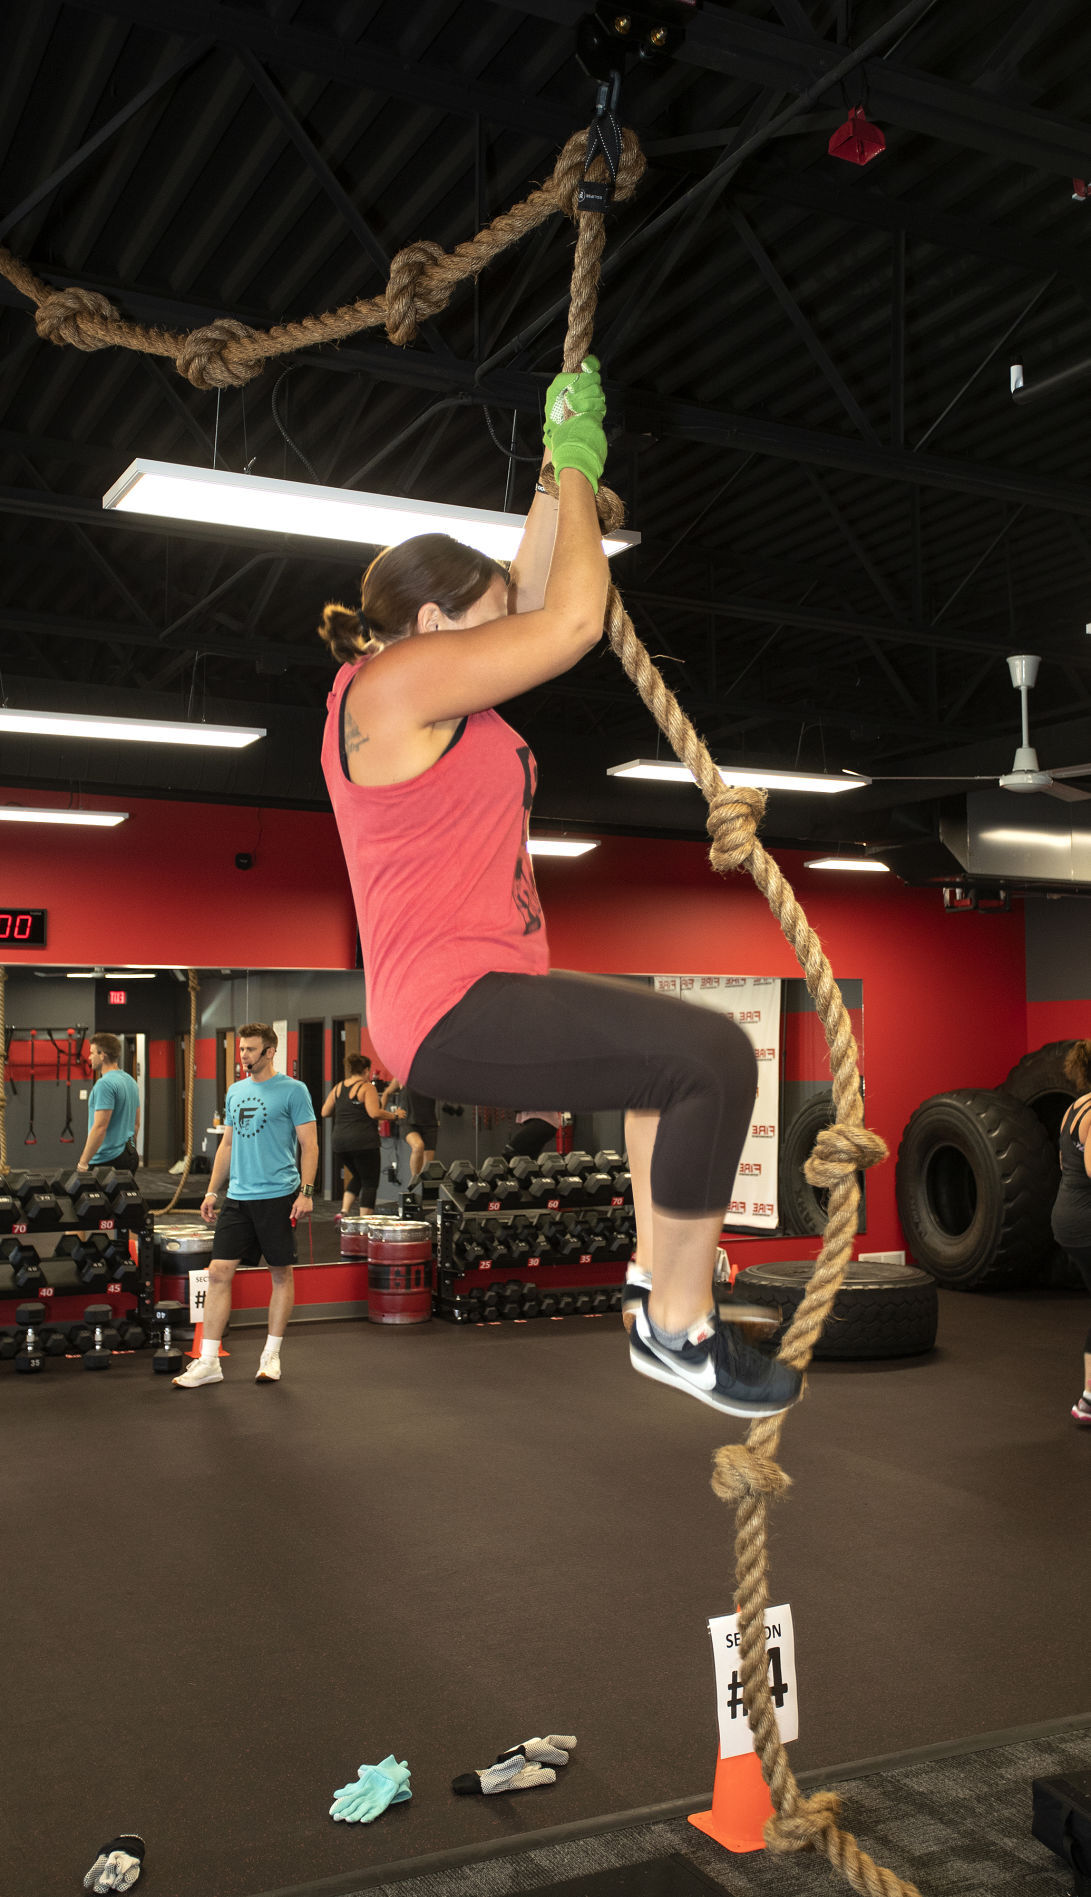 Heather Halverson, of Platteville, climbs a rope as part of her workout at FIRE Fitness in Platteville, Wis., on Monday.    PHOTO CREDIT: Stephen Gassman